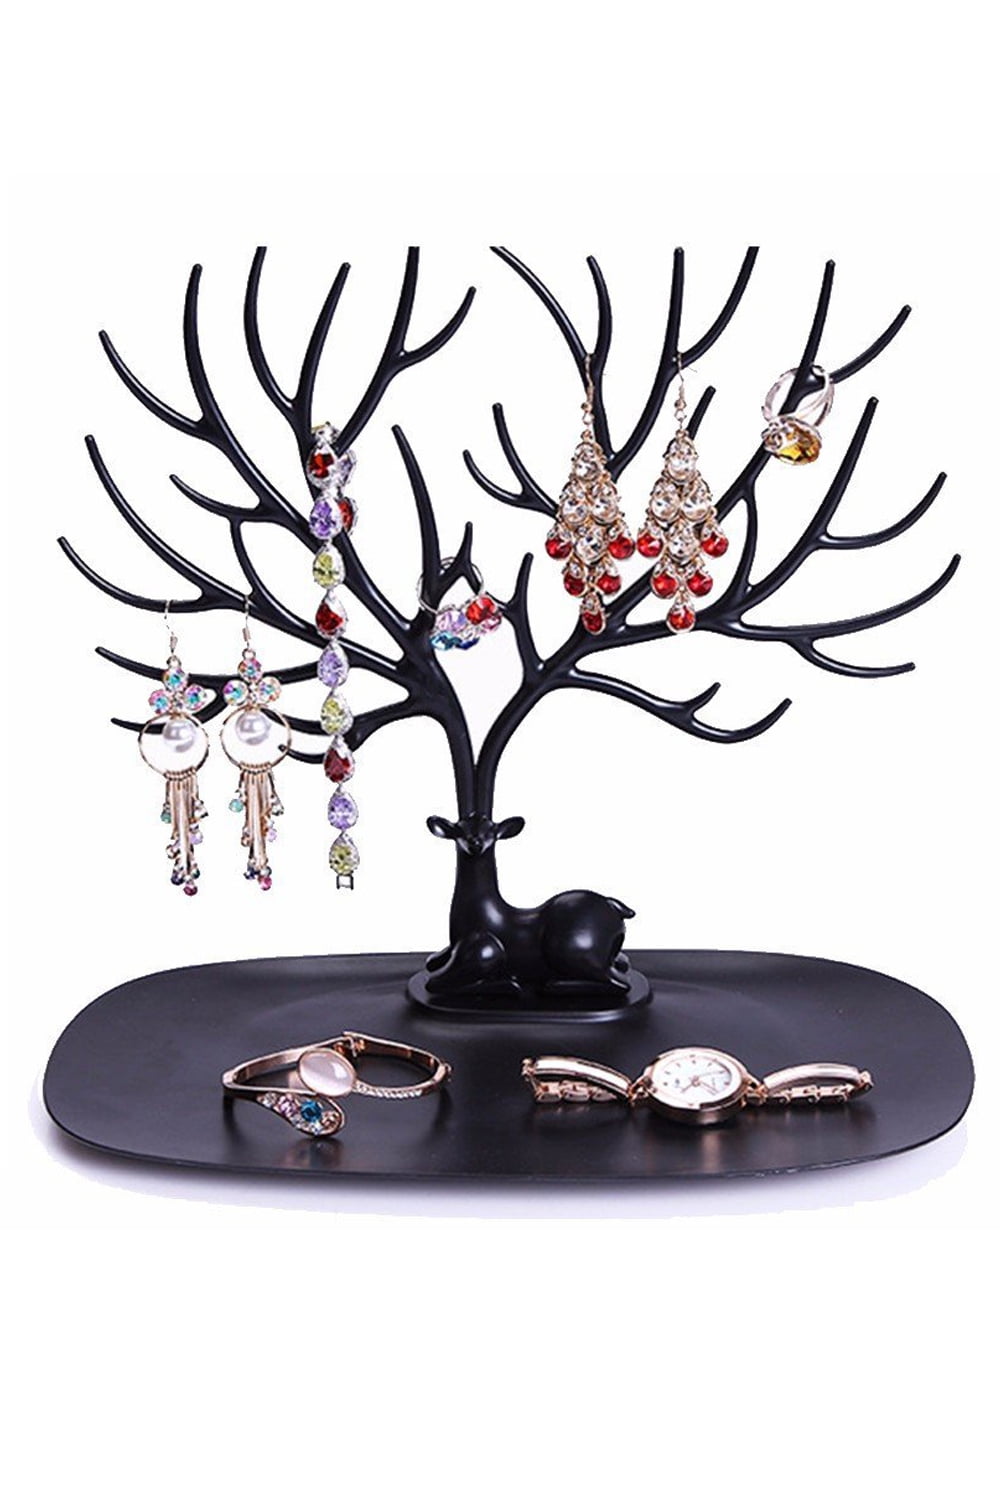 Ideal for Bangles Pendants Anklet Flexzion Jewelry Display Tree Stand Earring Necklace Holder Rack Organizer Tower Table Top Decor Silver